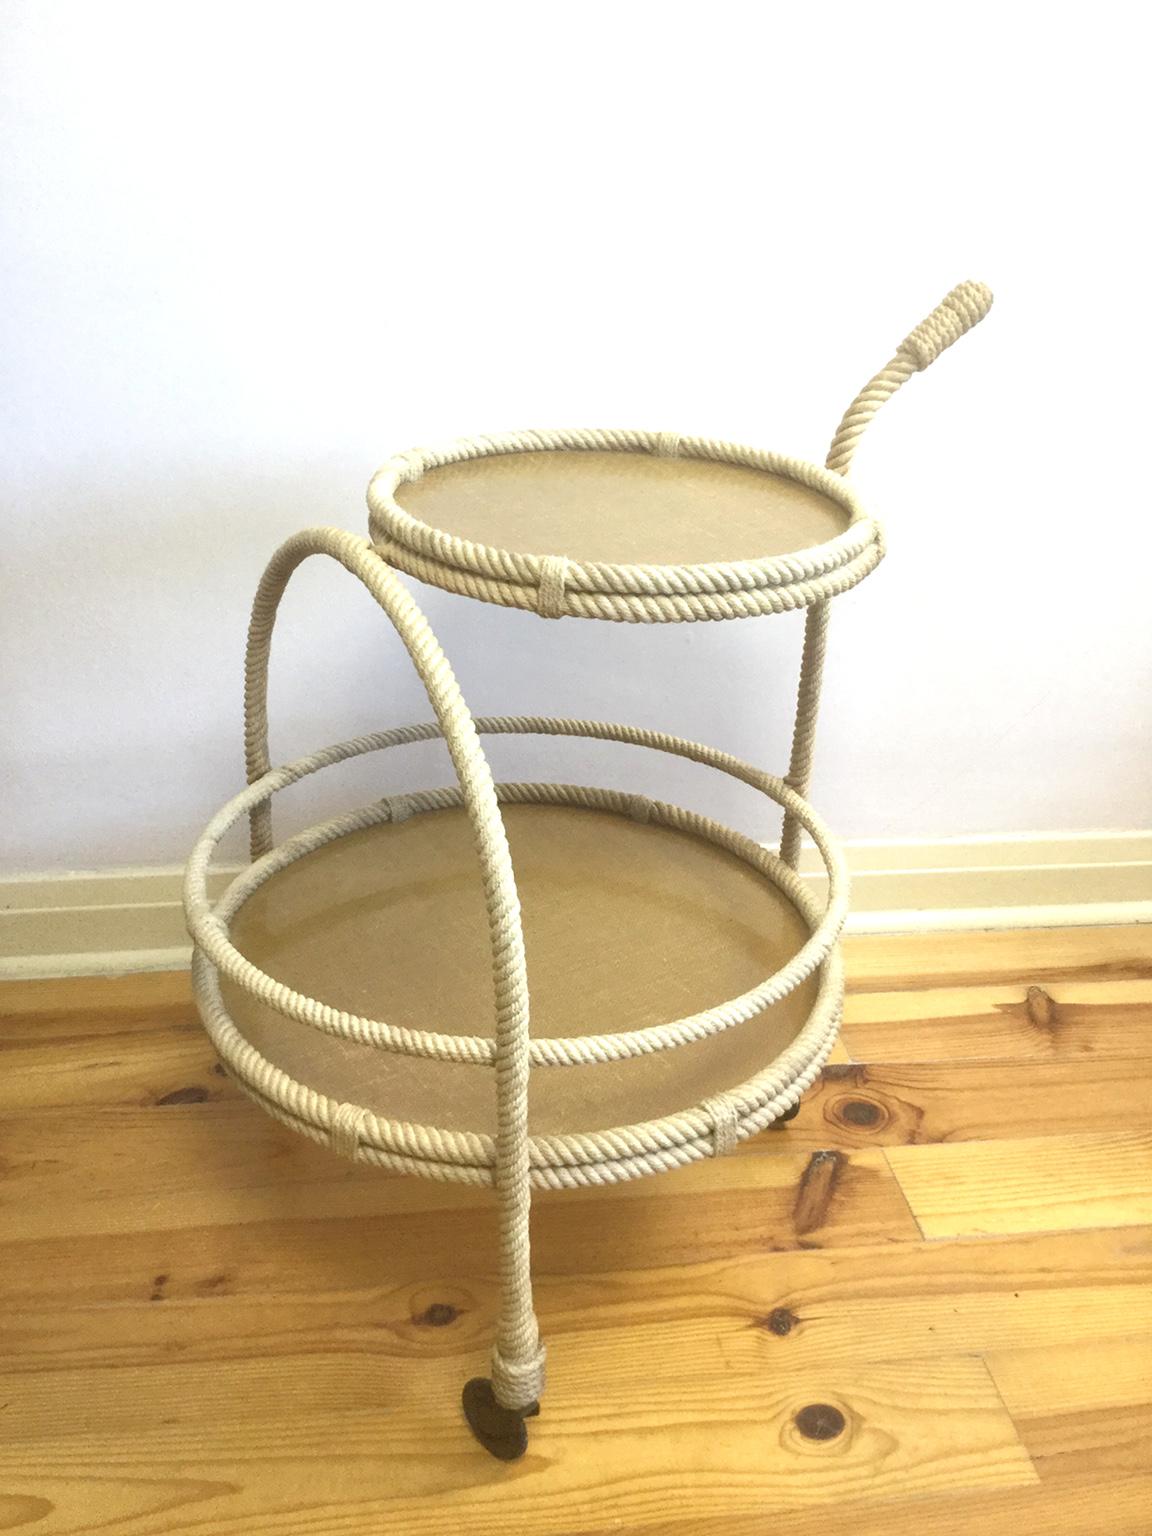 Adrien Audoux et Frida Minet rope and fiber glass drink trolley 
Manufactured by Vibo France
Frame is made of rope braided with two fiberglass trays on wheels.